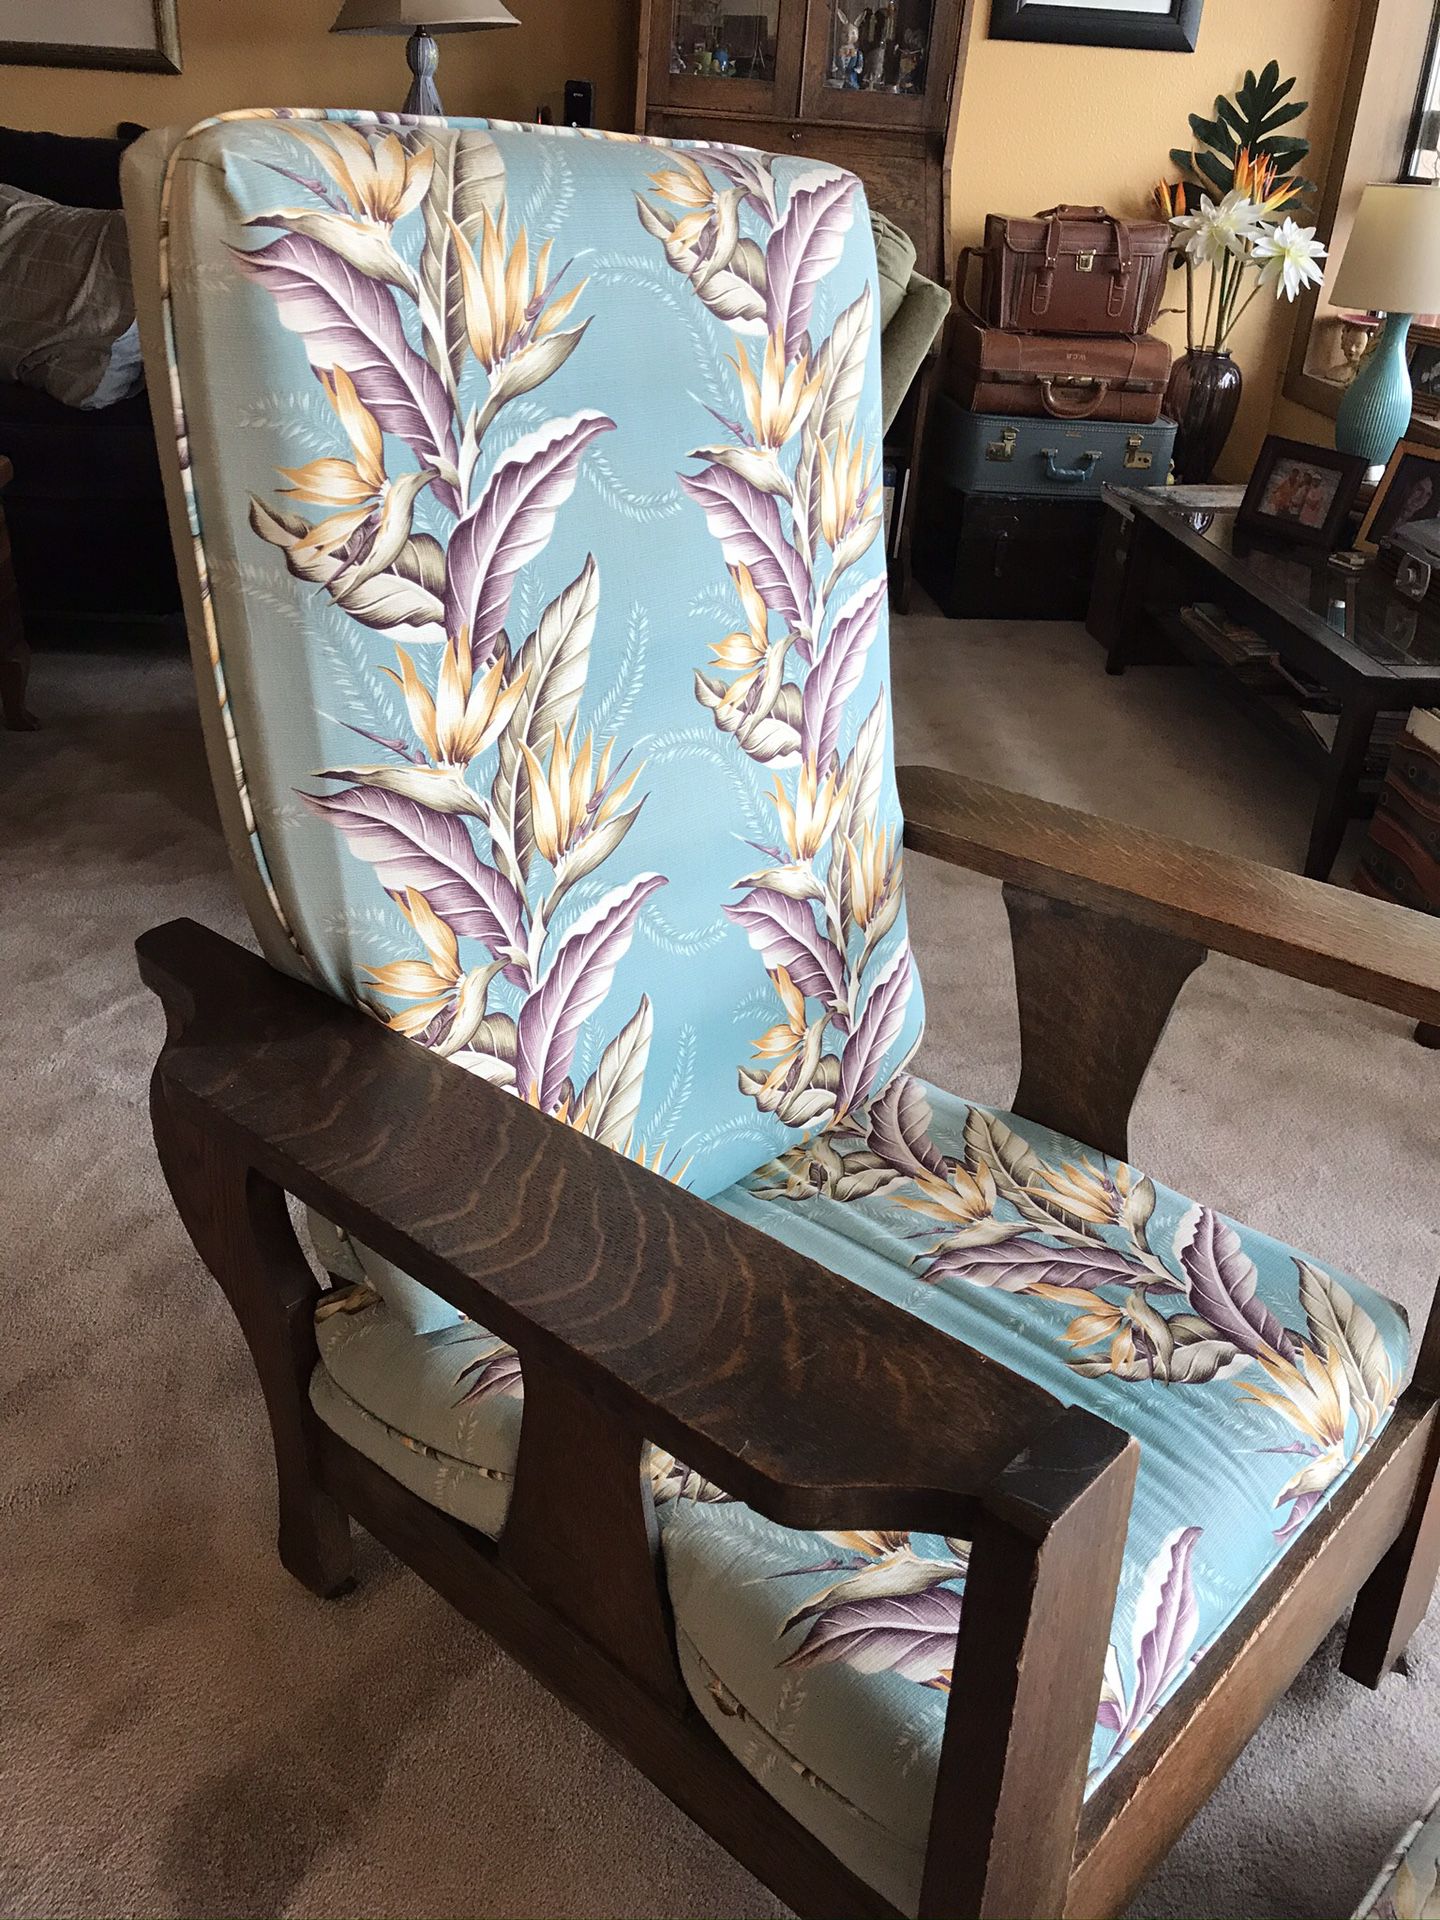 Vintage Morris chair recliner, with ottoman.